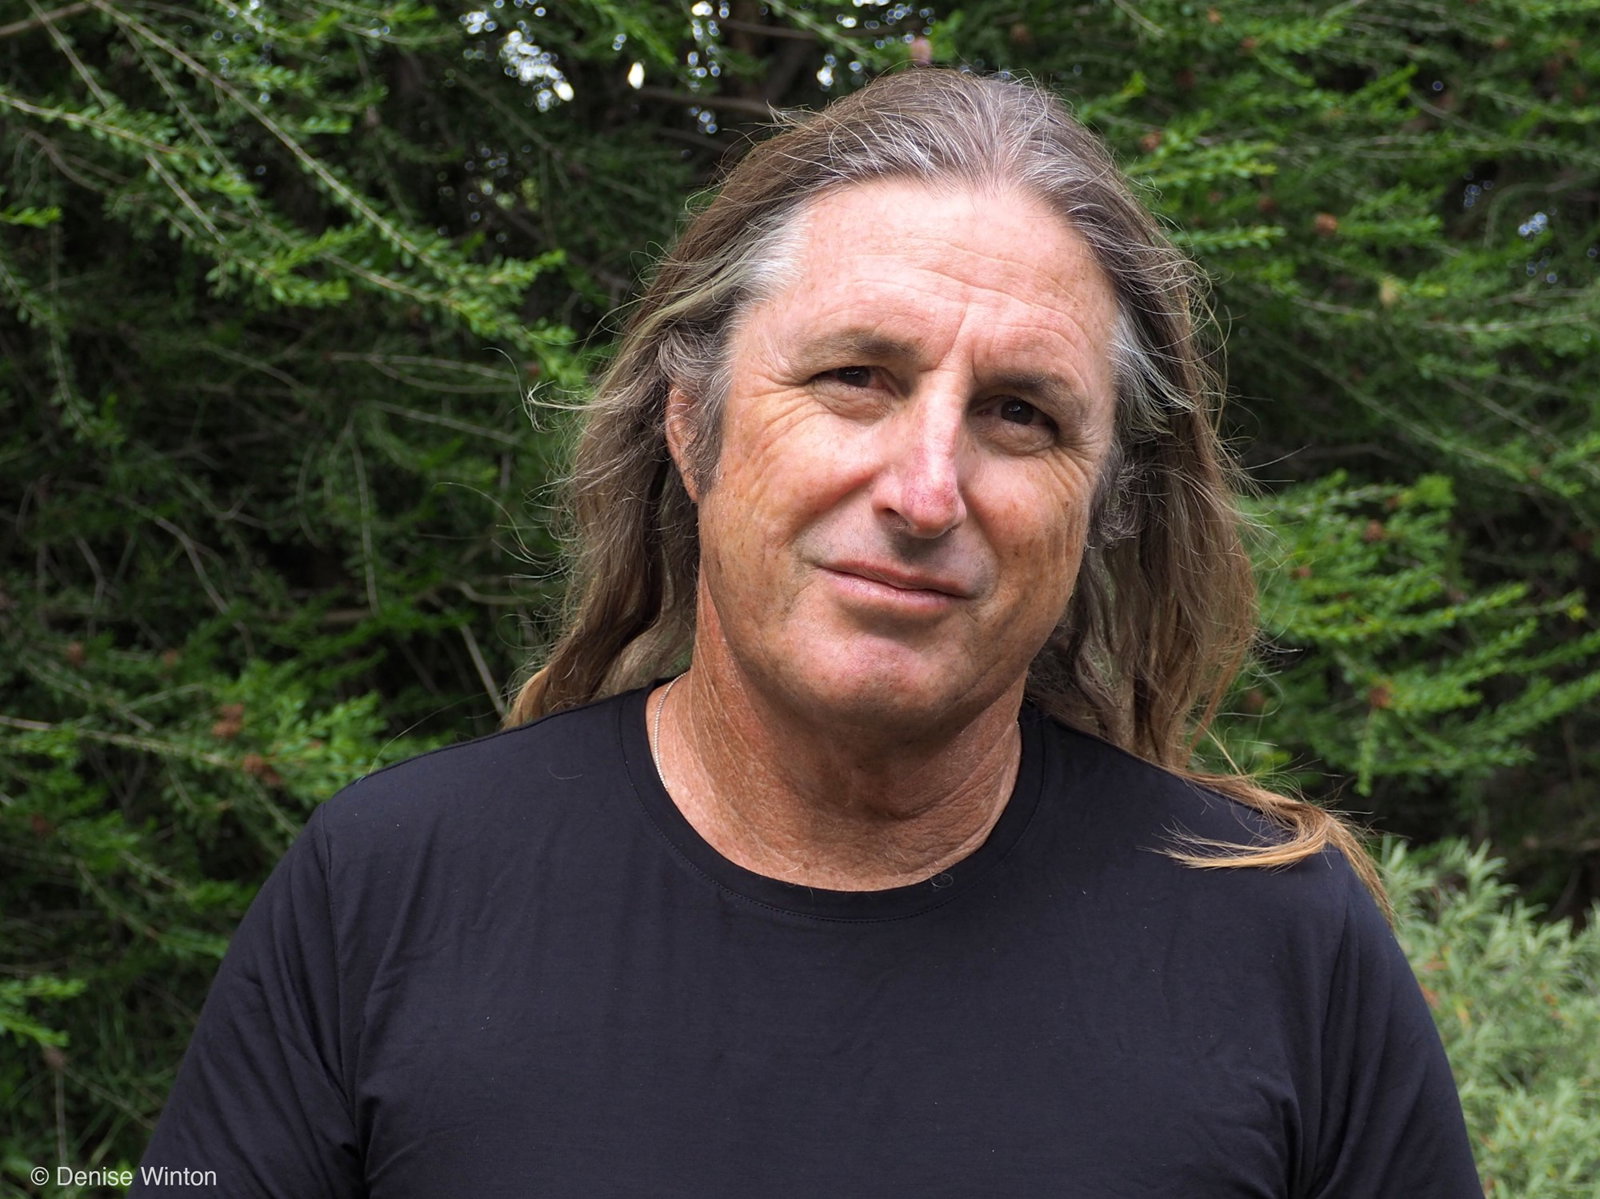 A white man in his 60s with greying long hair, wearing a black t-shirt, standing in front of greenery.